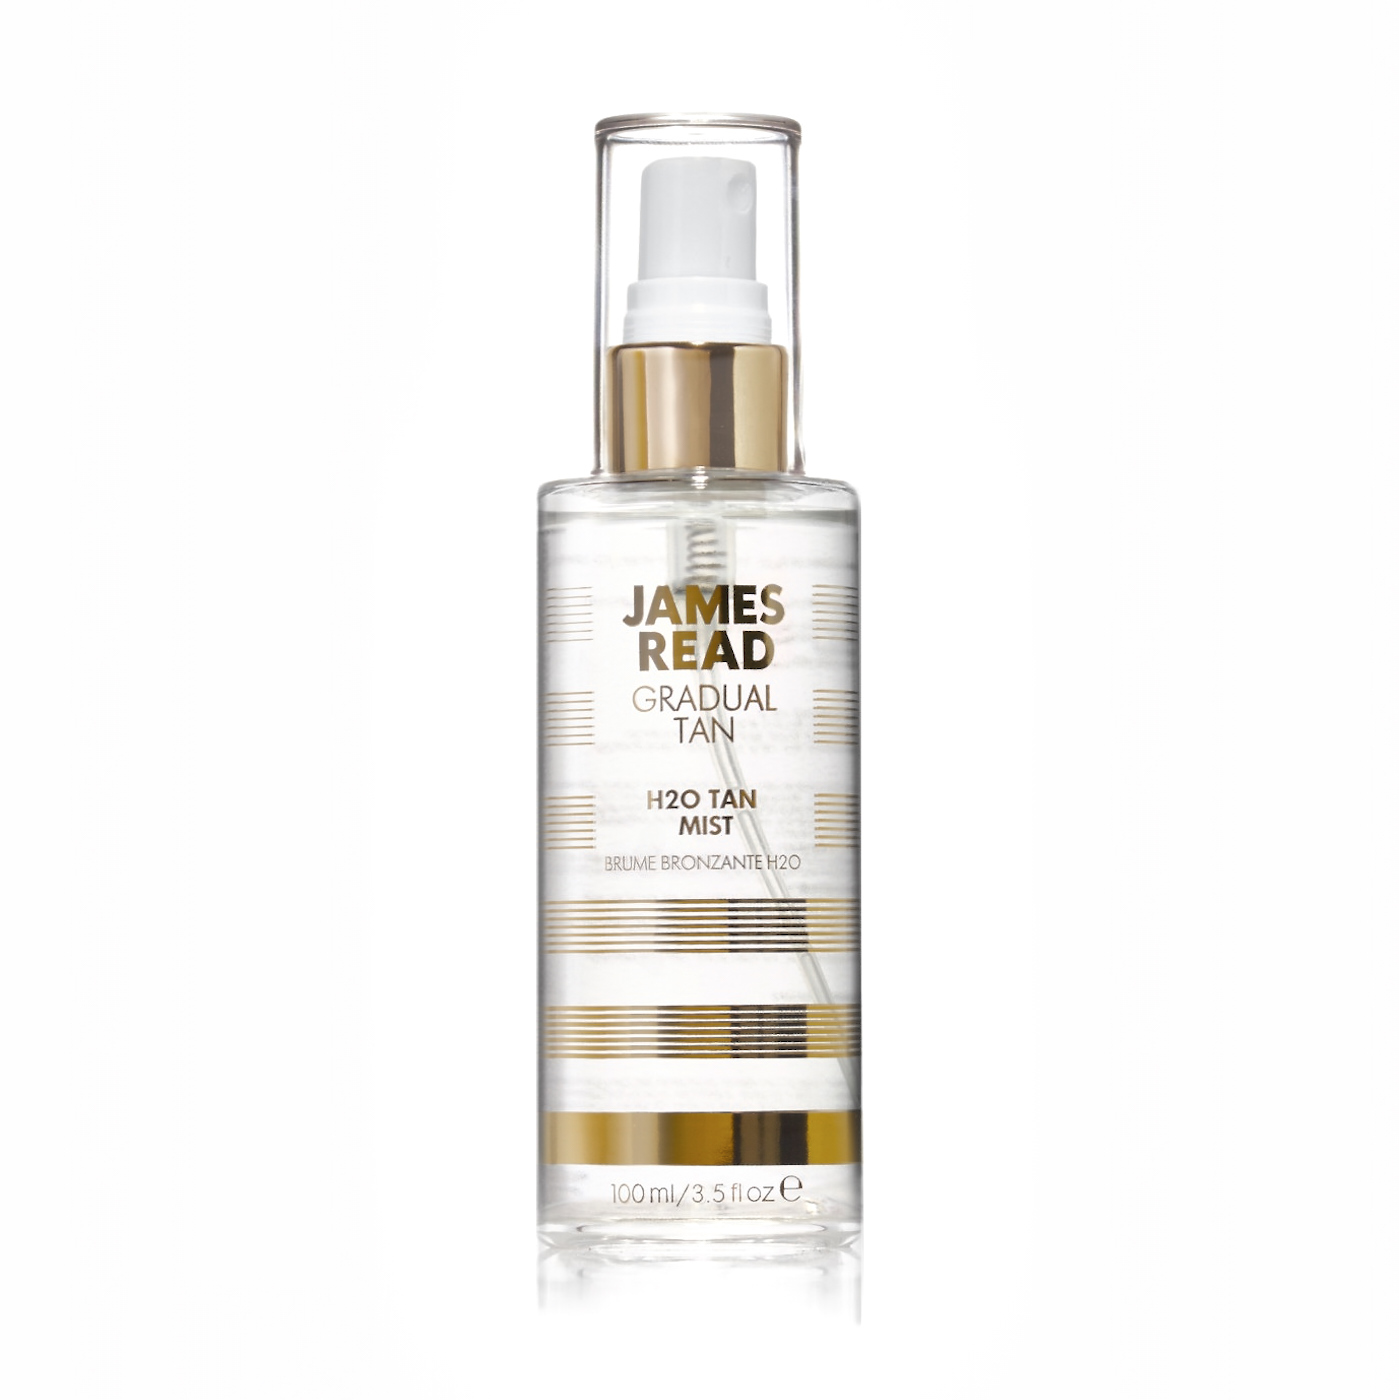 James Read Gradual Tan, one of the best multitasking beauty products